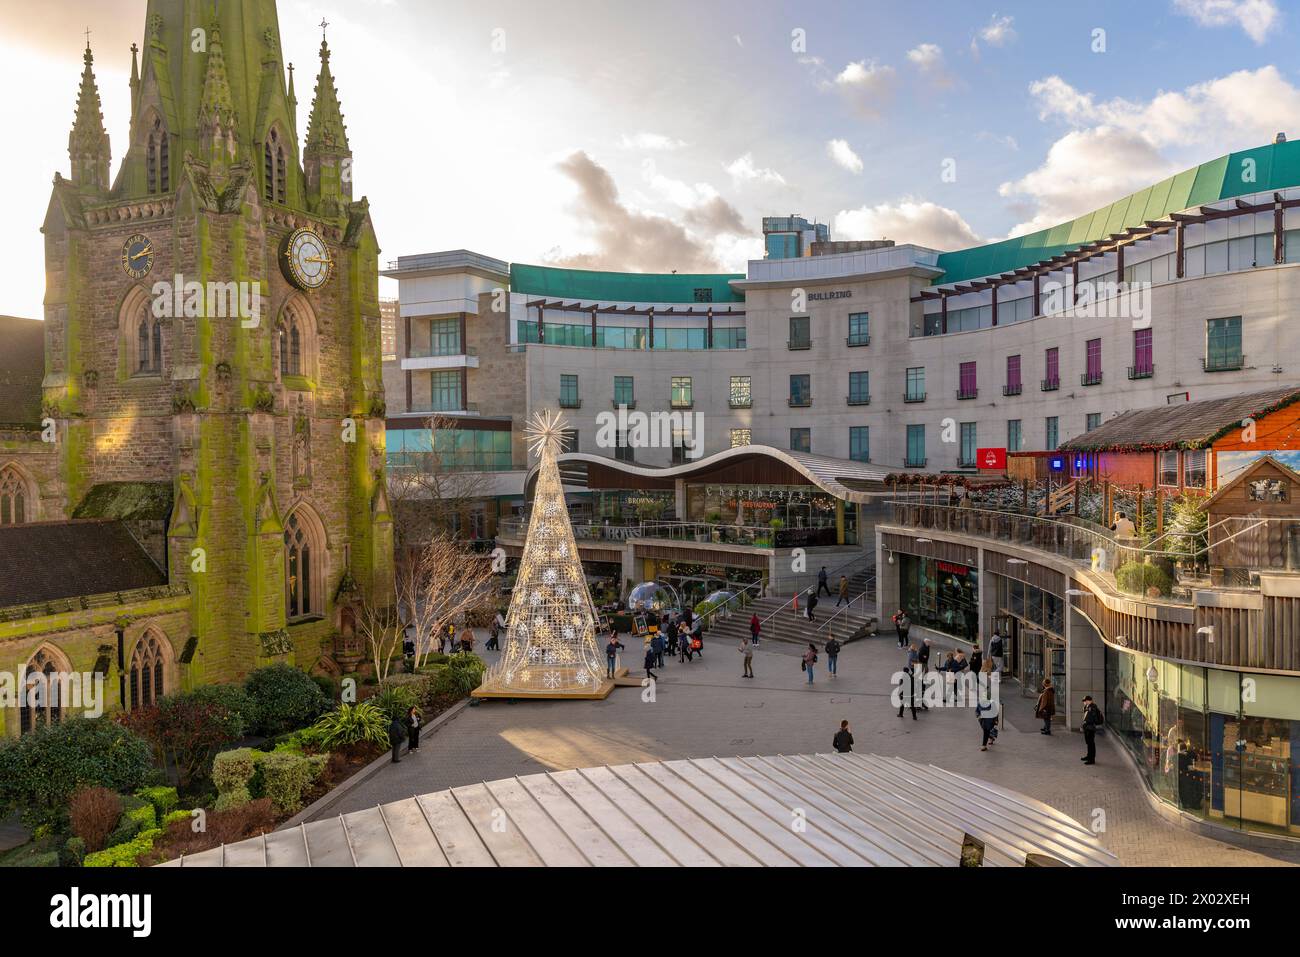 View of St. Martin's Church at Christmas from the Bullring Shopping Centre, Birmingham, West Midlands, England, United Kingdom, Europe Stock Photo